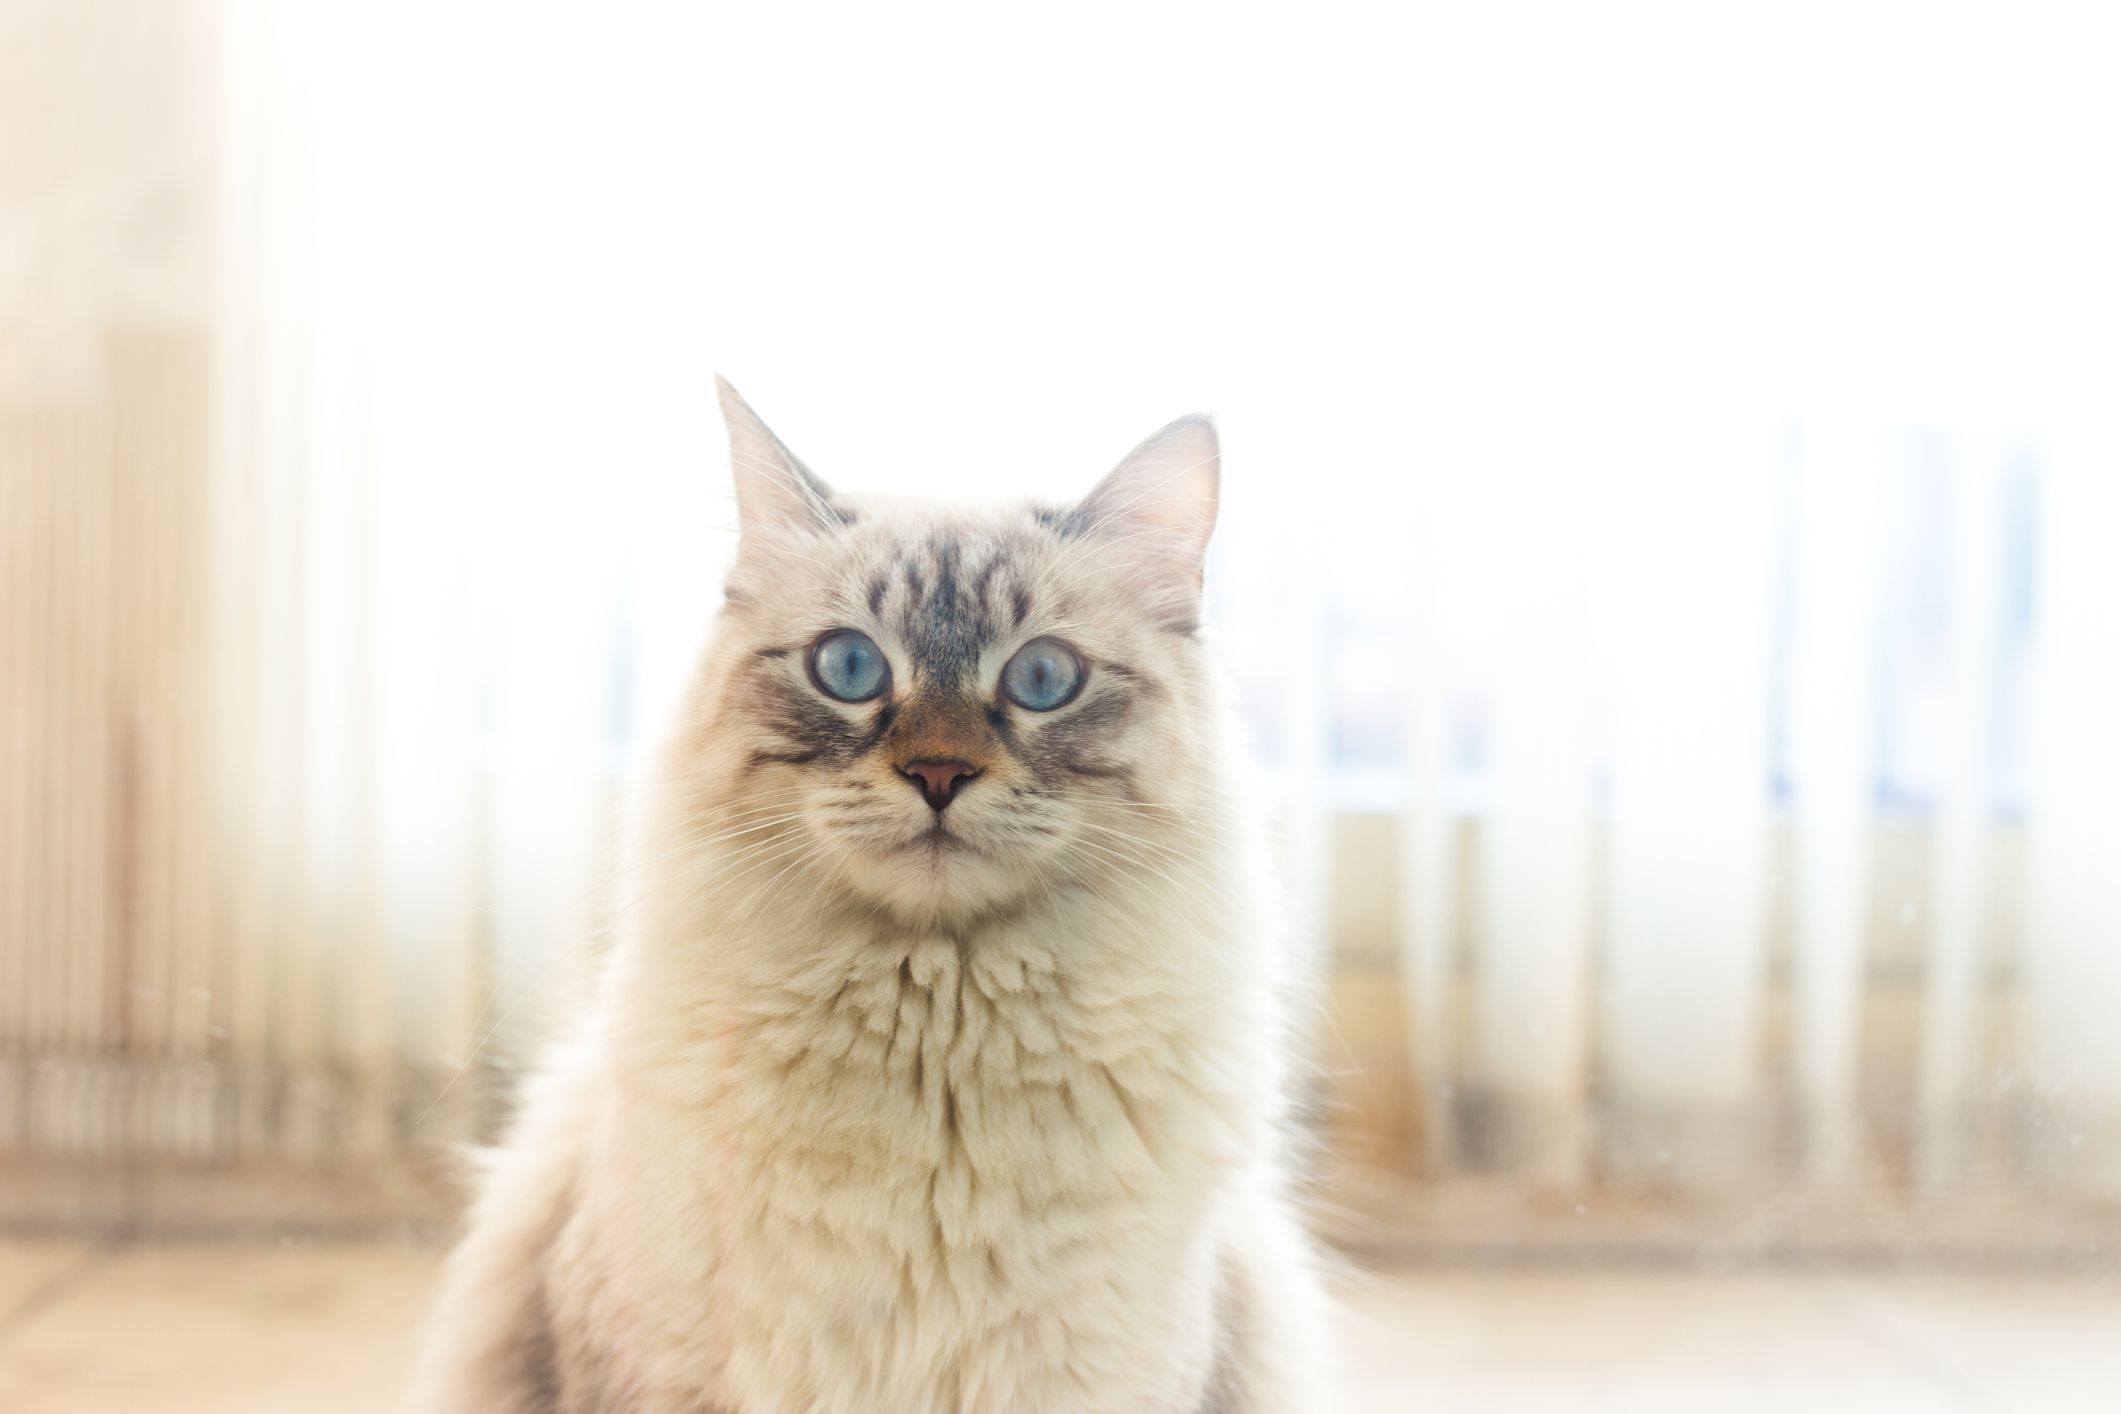 A long-haired white and tan cat with blue eyes looking at the camera standing in front of white curtains.